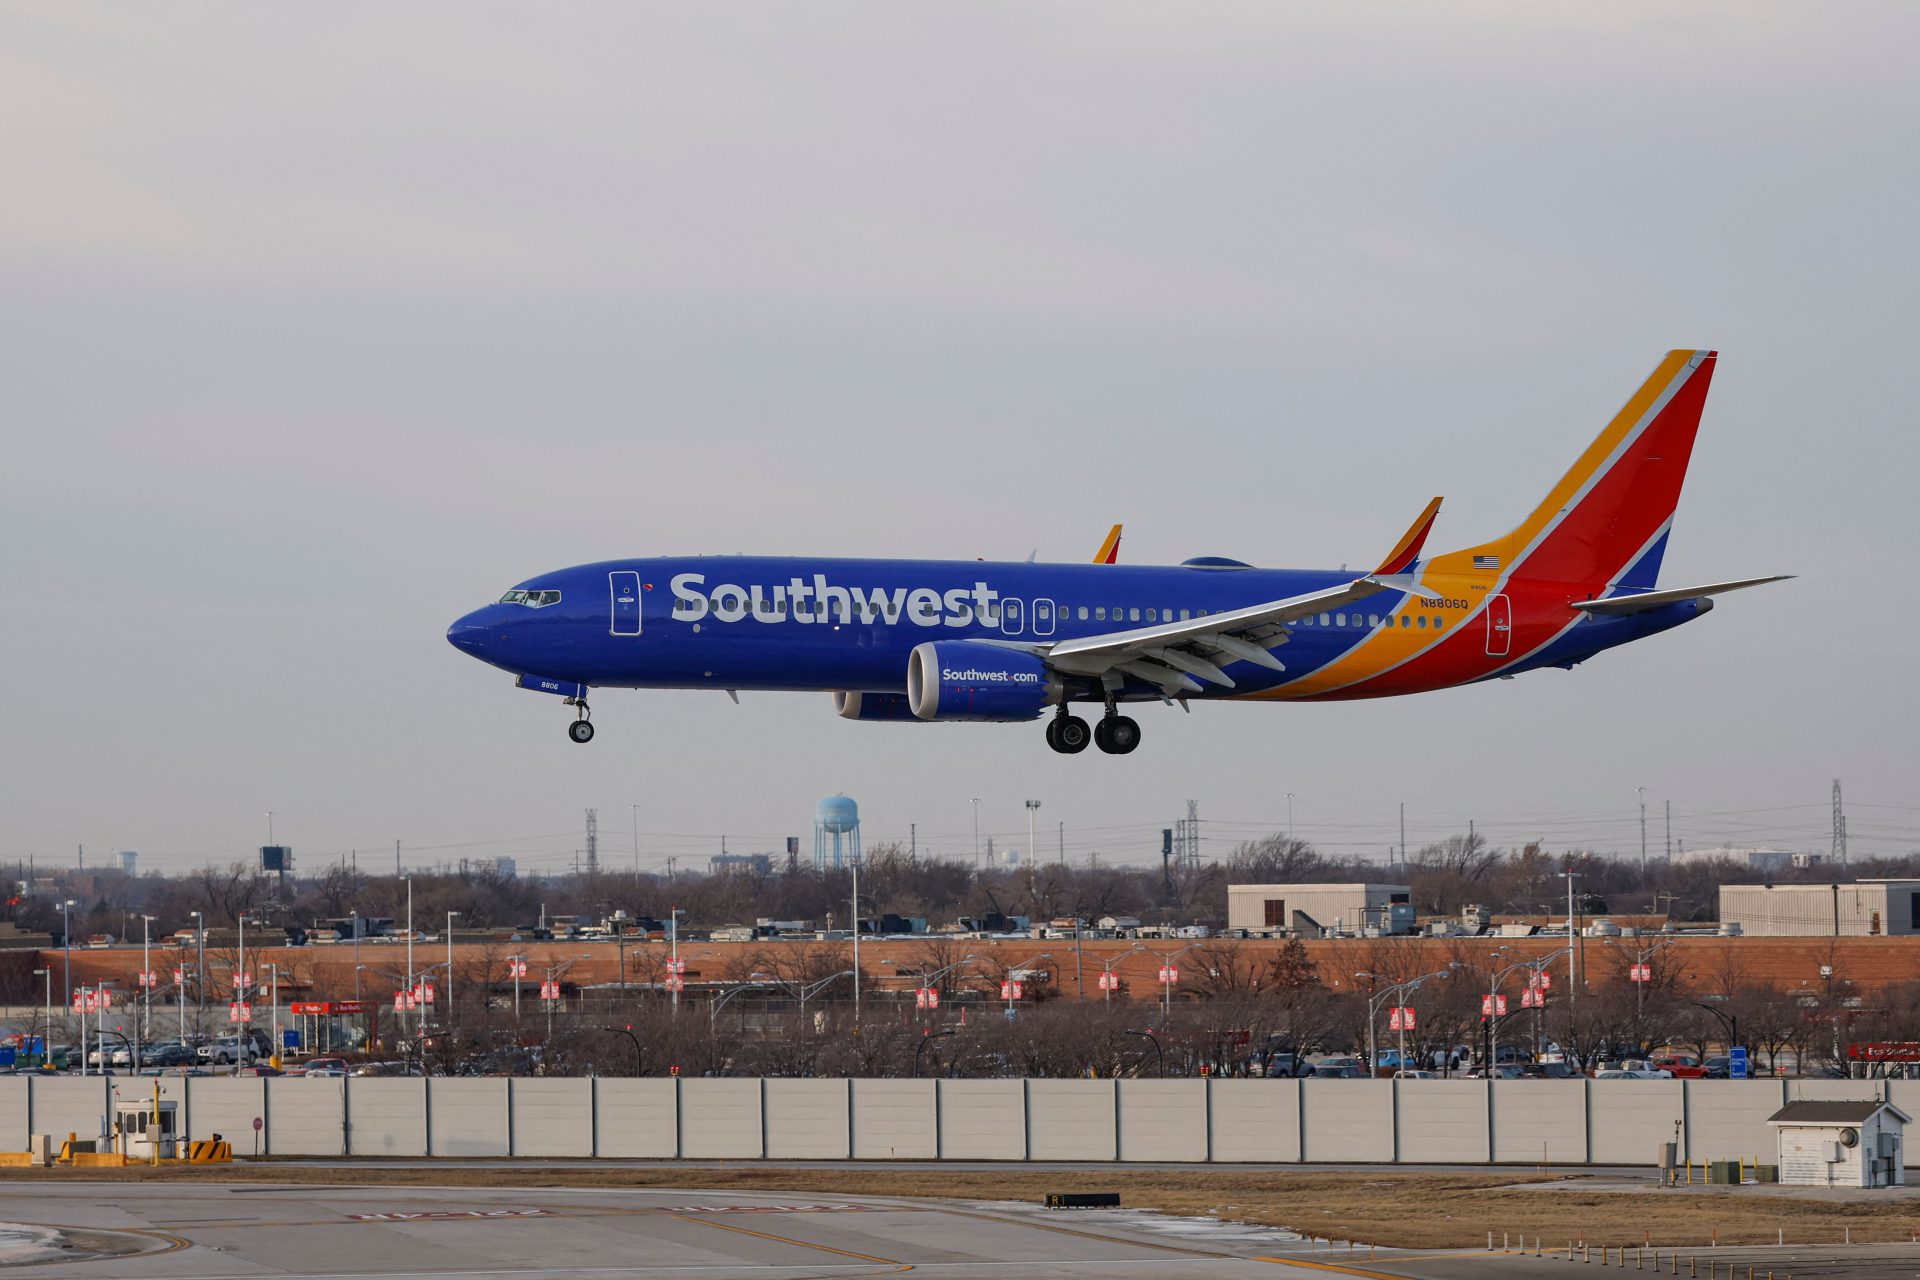 Southwest Viral Video Shows Man Going OFF About A Crying Child On Plane